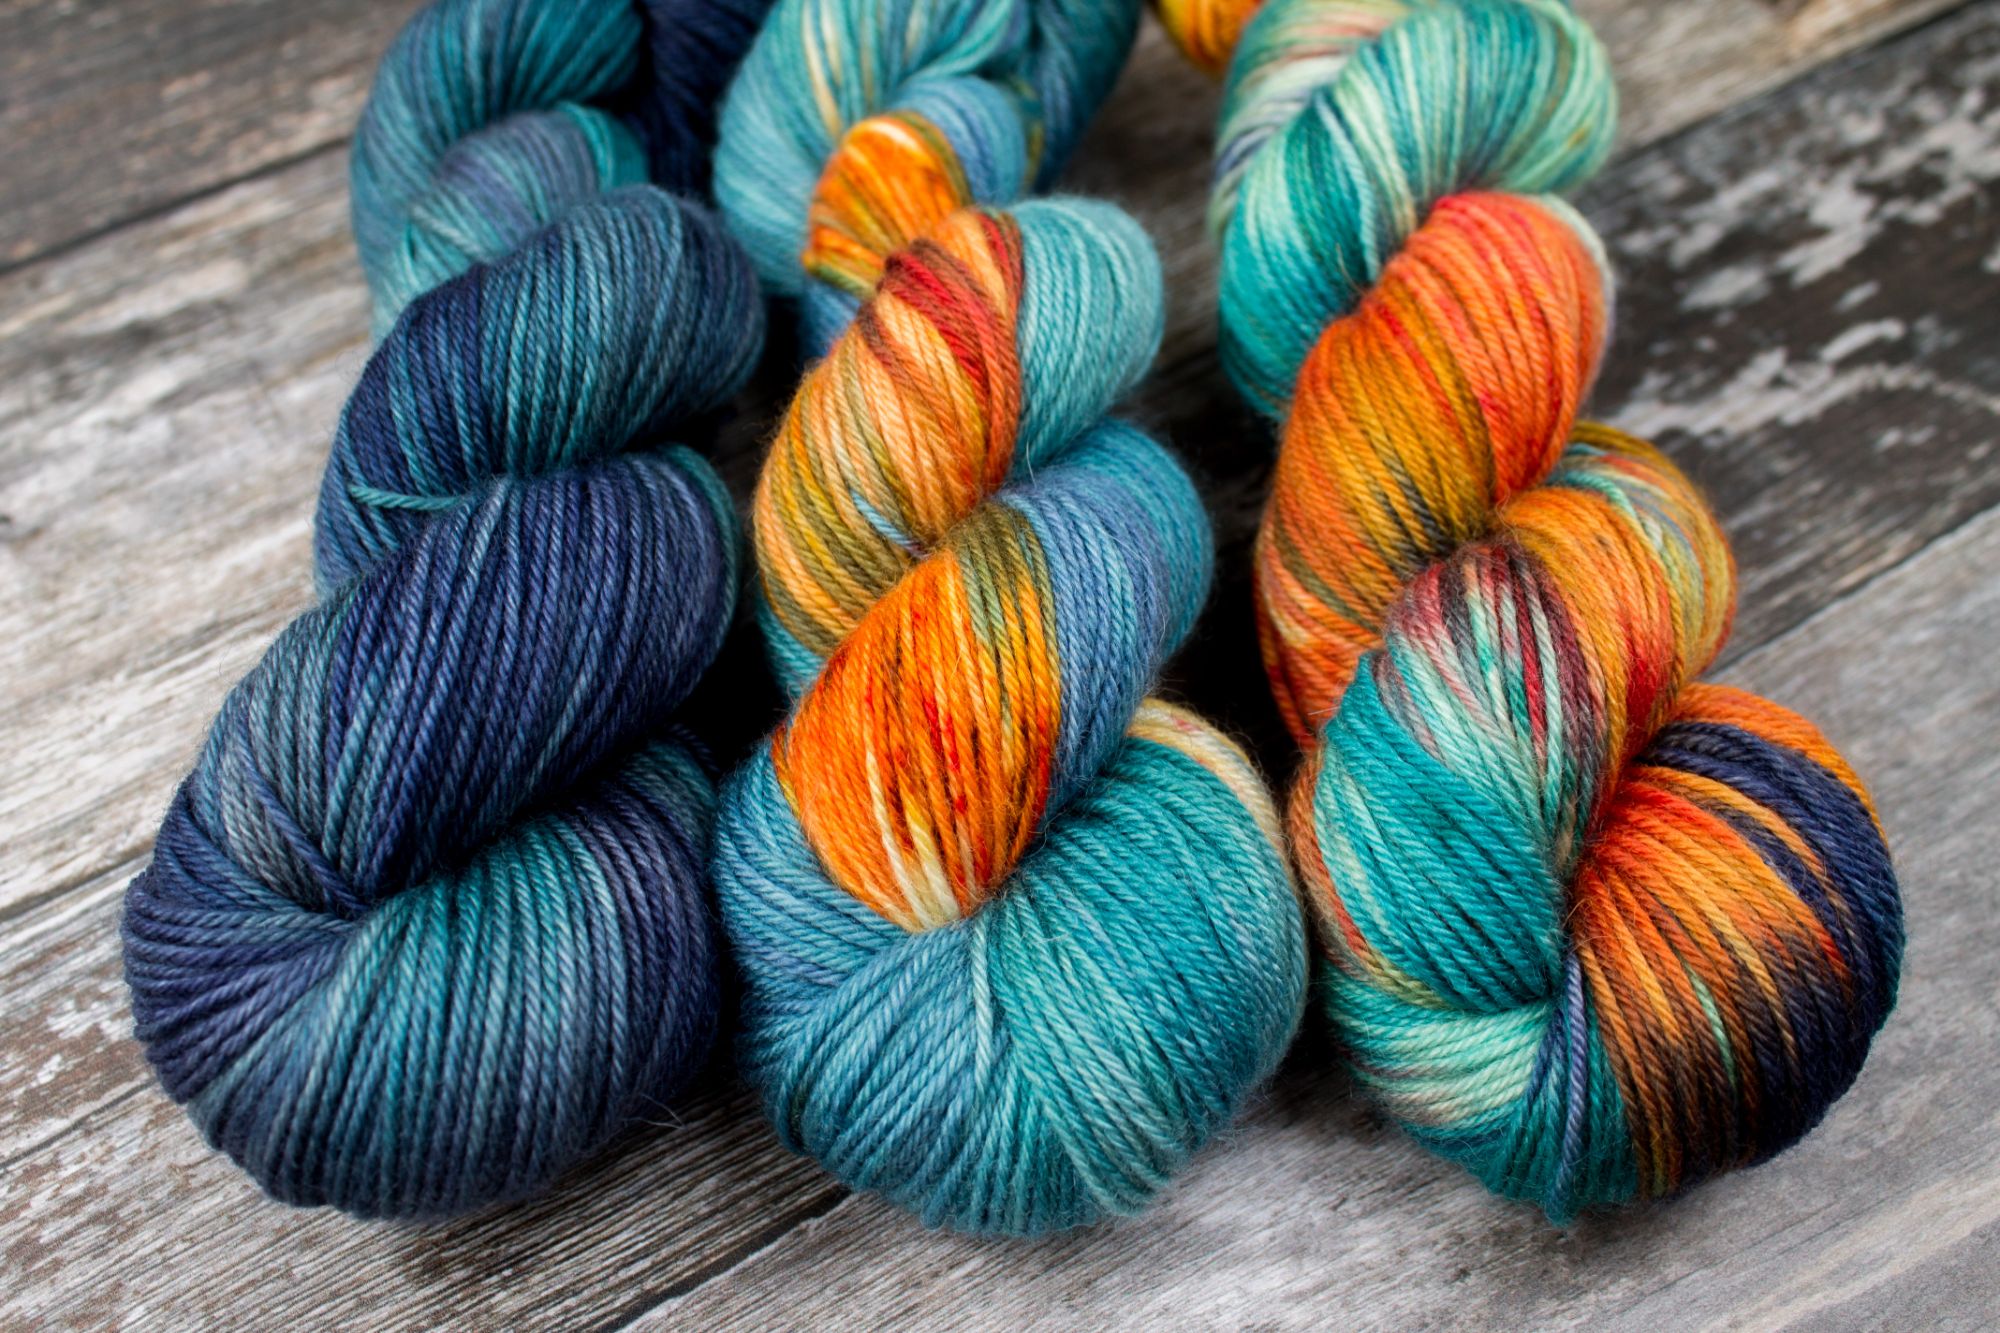 3 skeins, darkest at the black in navy and teal, light navy teal with orange speckled sections, rightmost very variegated teal navy and oranges with gold